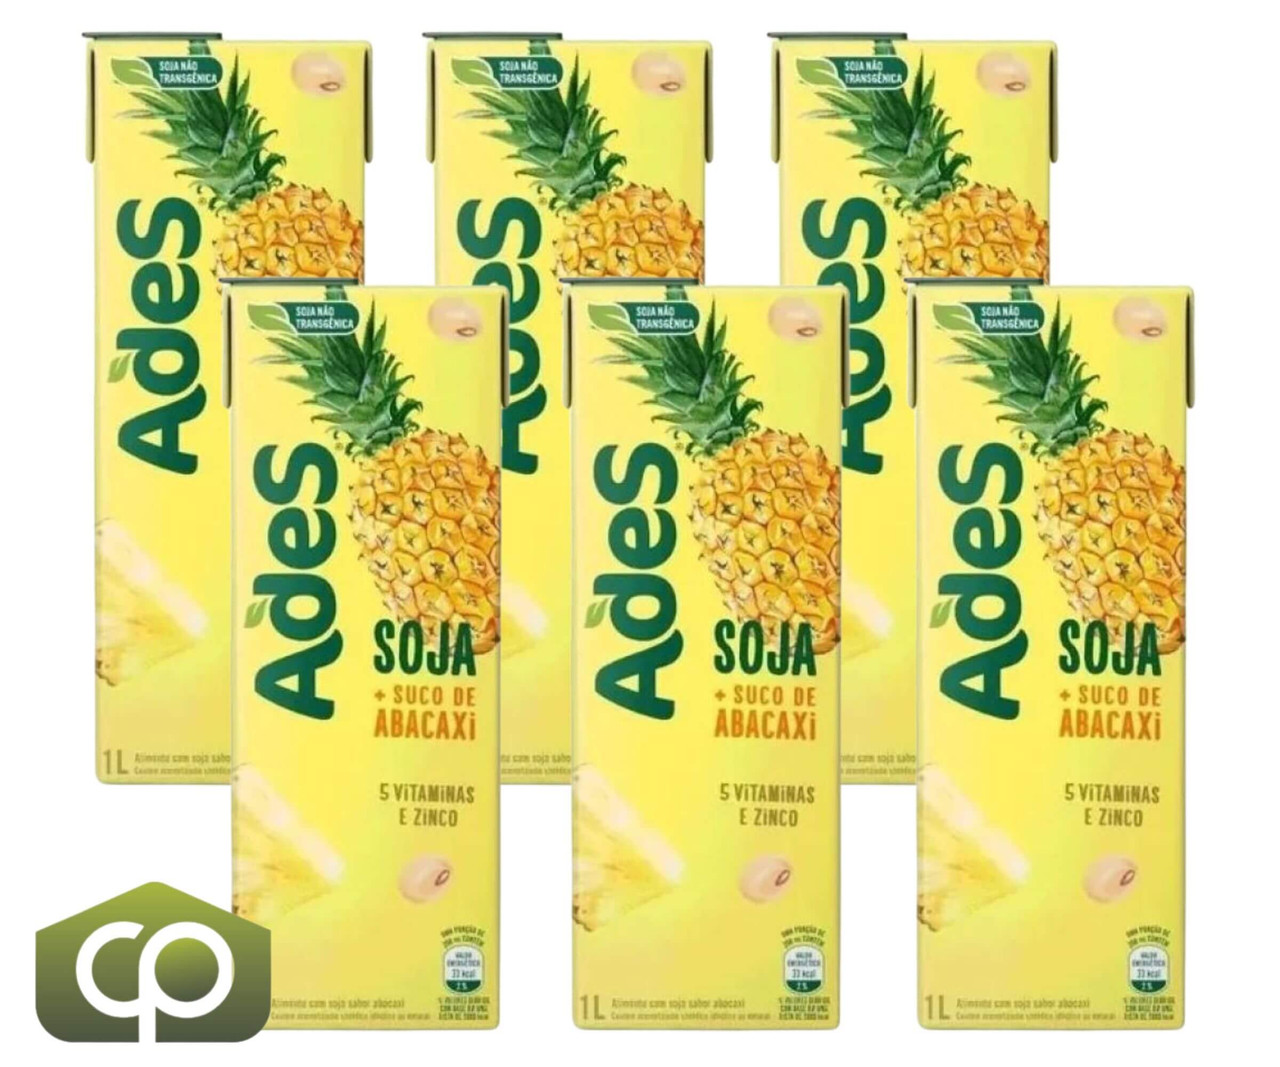 ADES Pineapple Soy Juice 6-CASE - 1L Each | Refreshing Pineapple Soy Drink - Chicken Pieces